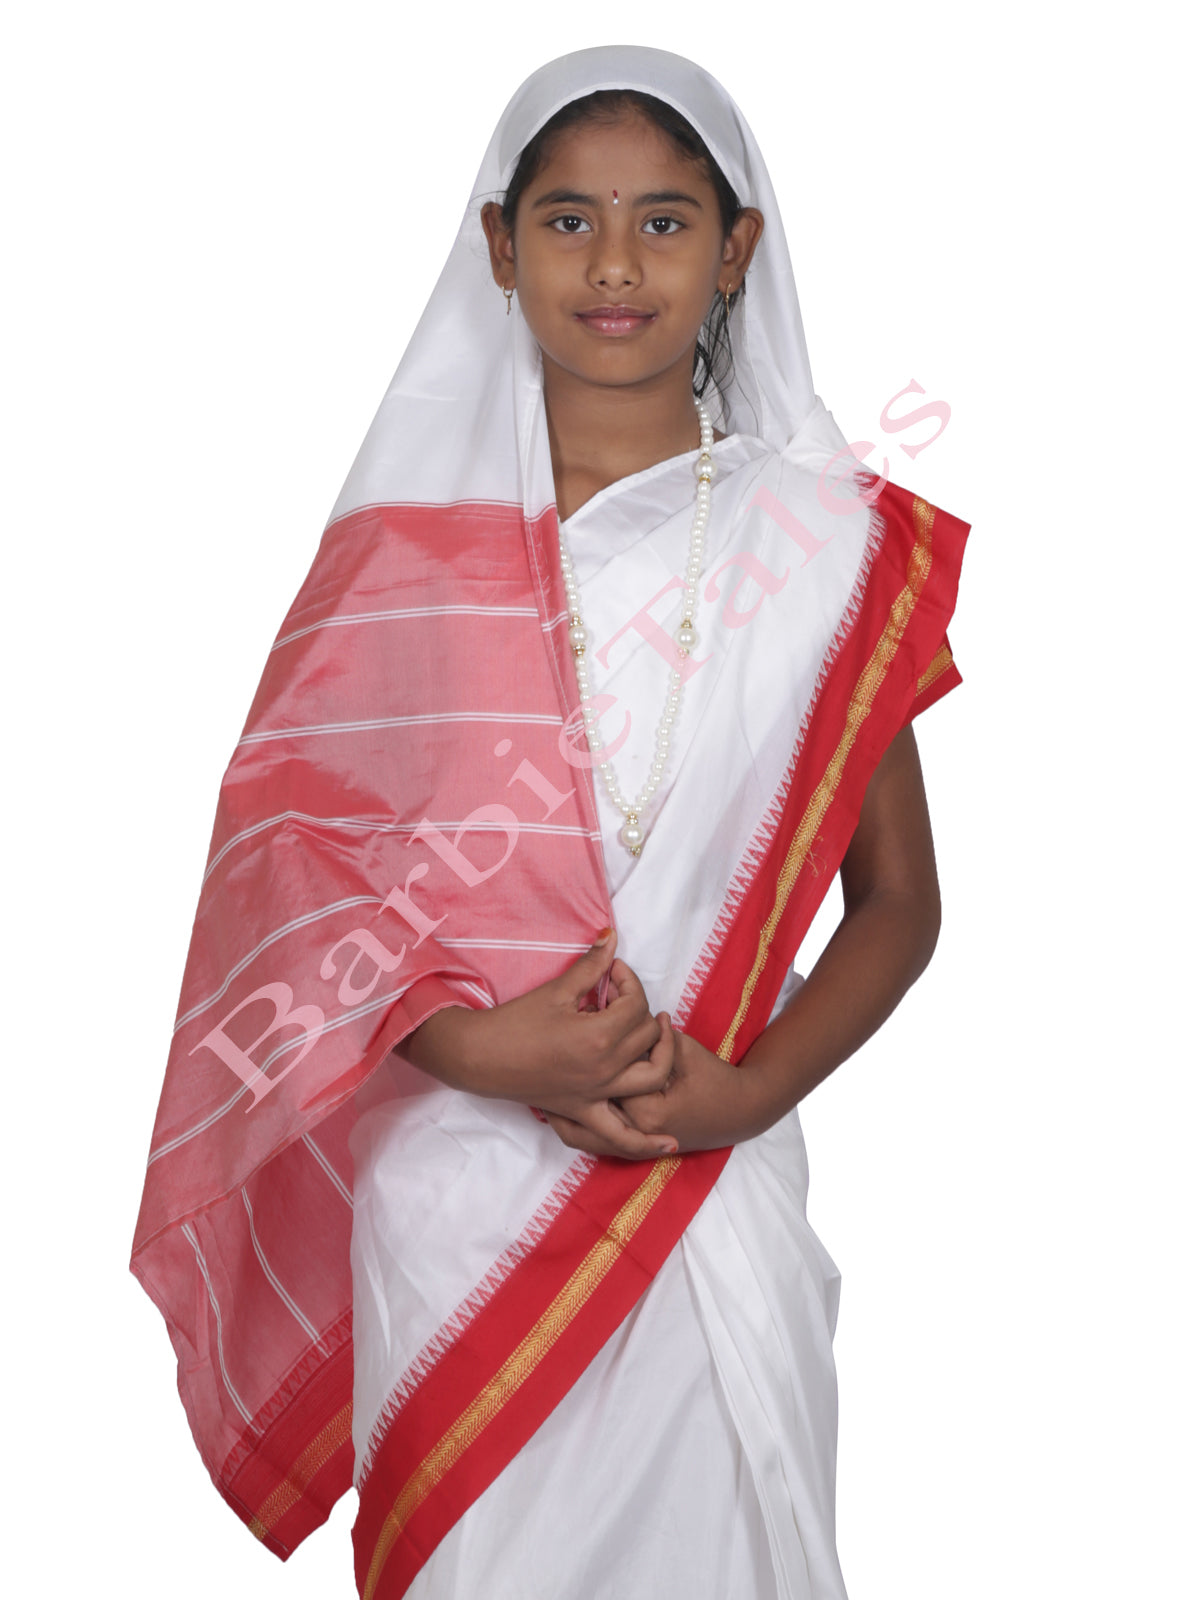 Buy BookMyCostume Bengali Saree Fancy Dress Costume 2-3 years Online at Low  Prices in India - Amazon.in